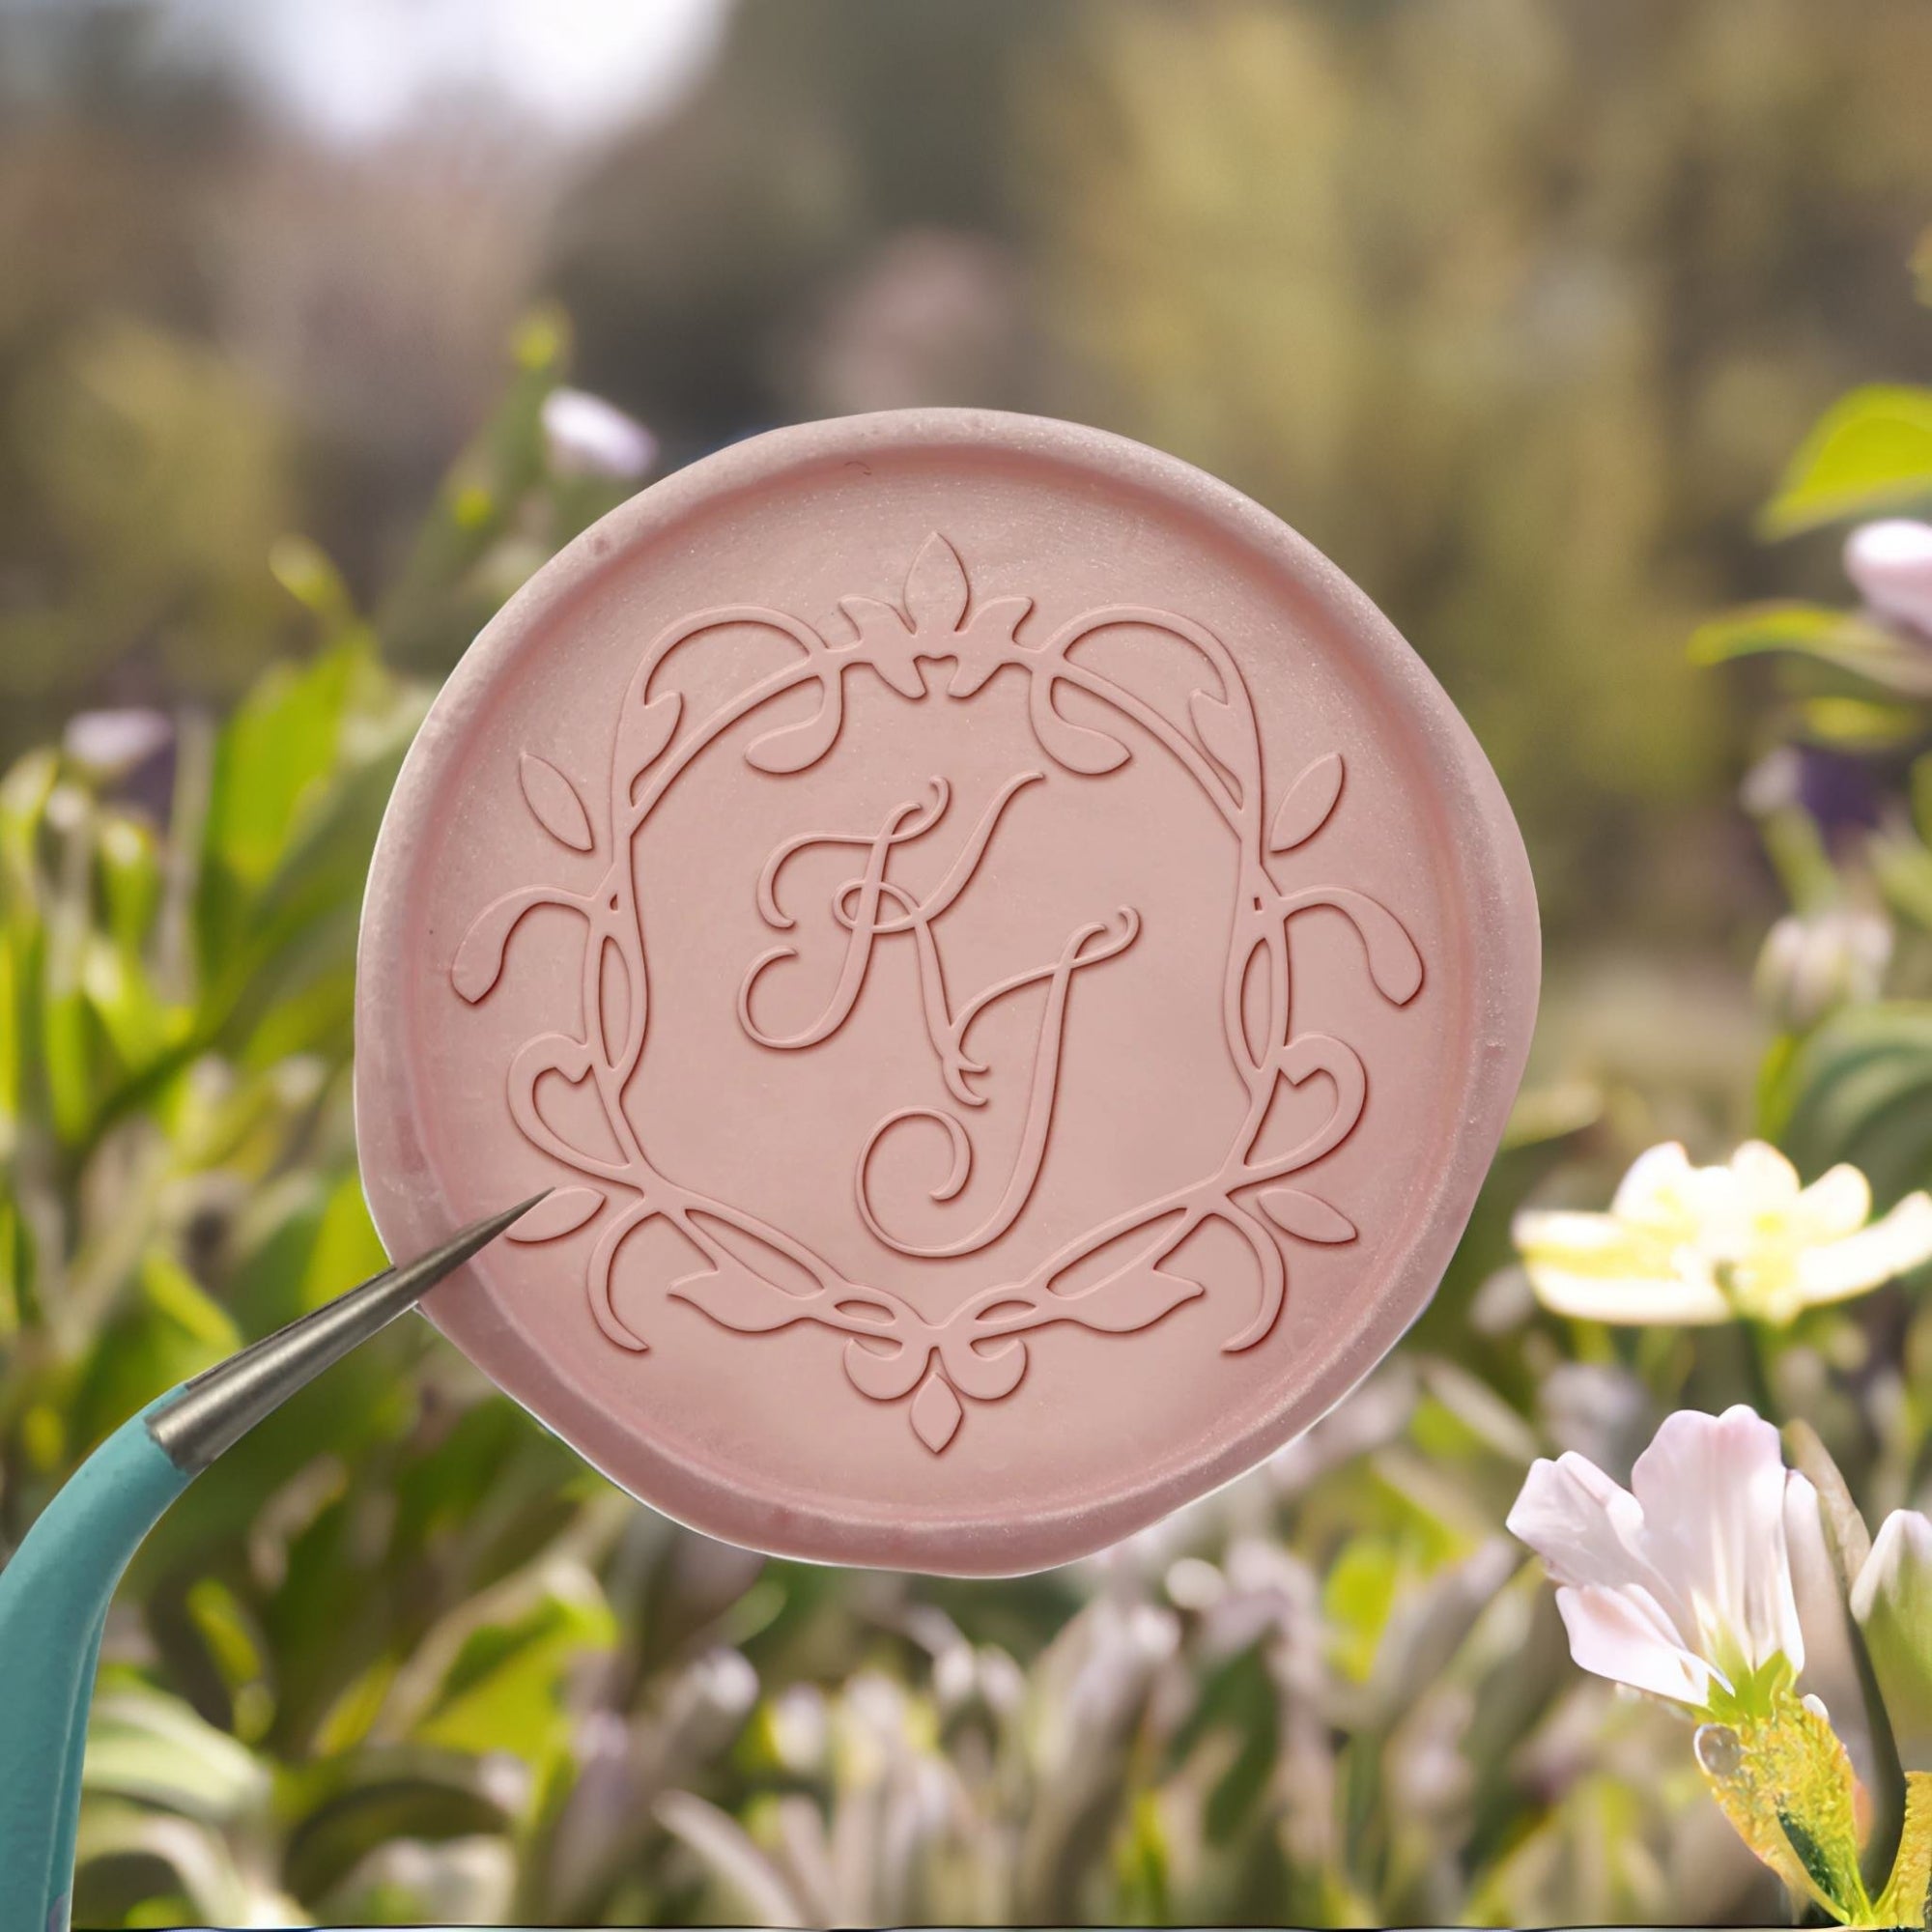 Curlicue Circle Double Initials Wedding Custom Self-Adhesive Wax Seal Stickers